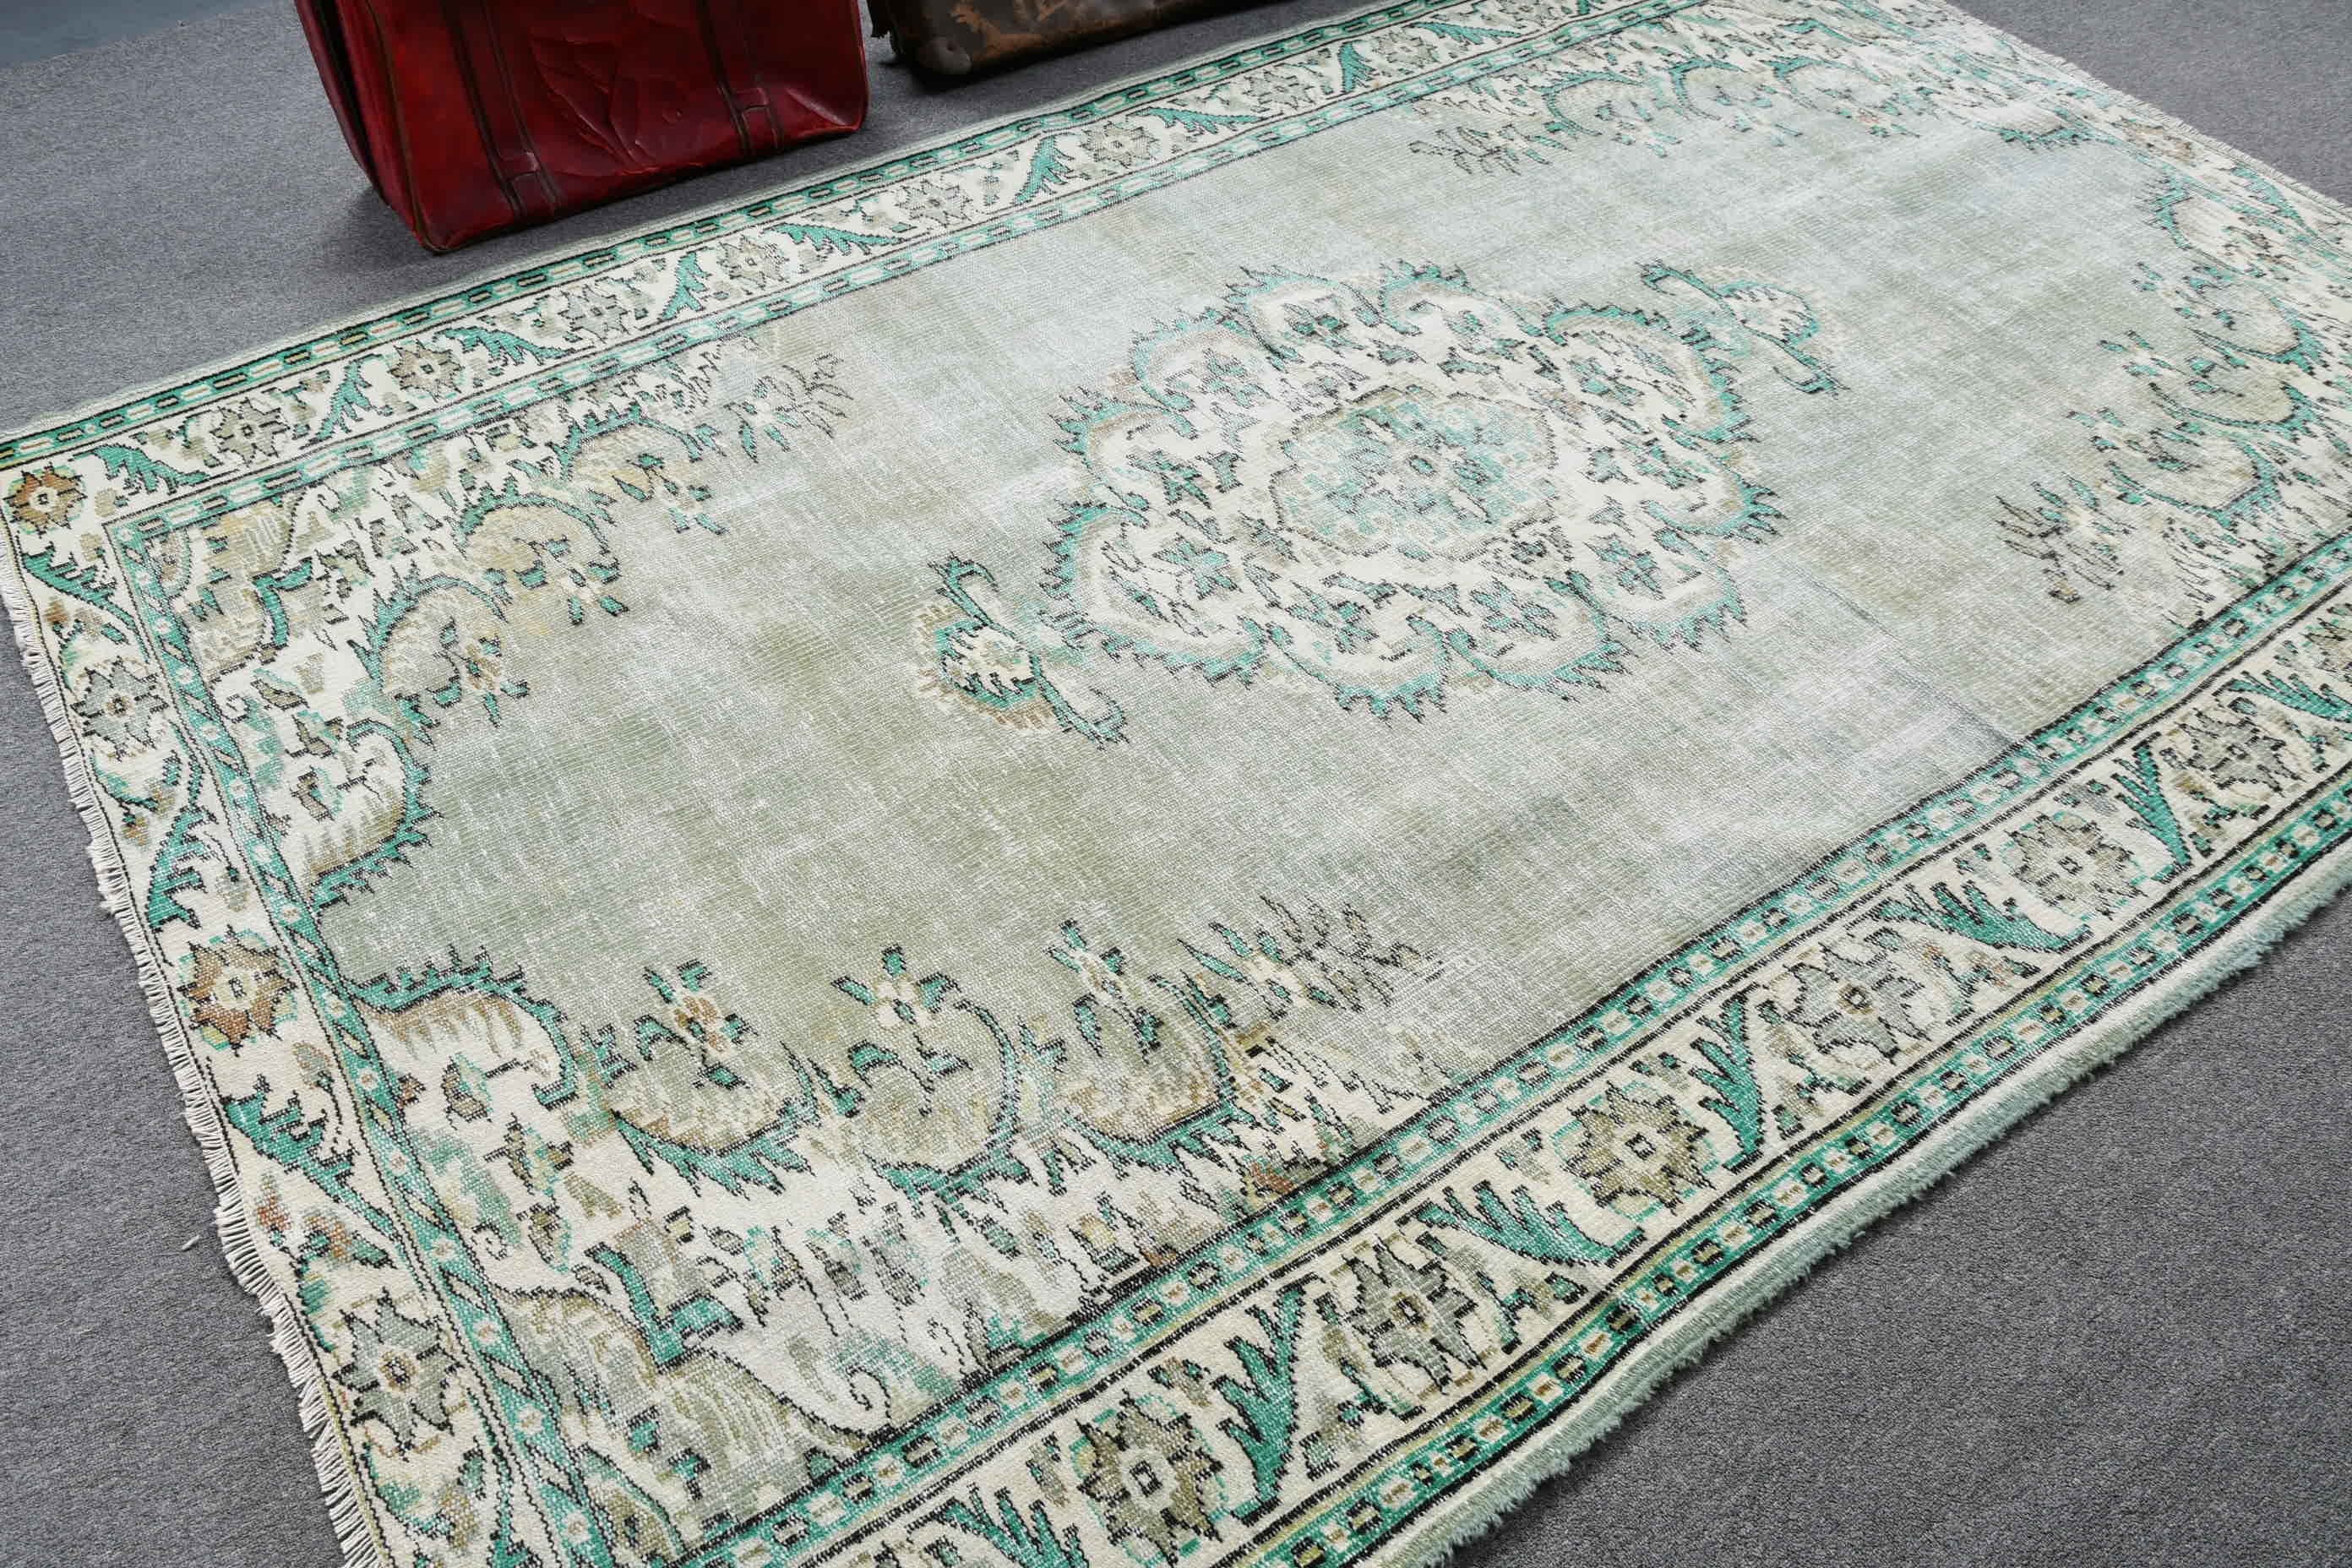 Turkish Rugs, Green Kitchen Rugs, 6.1x9.2 ft Large Rugs, Bedroom Rug, Rugs for Dining Room, Vintage Rugs, Dining Room Rug, Home Decor Rugs